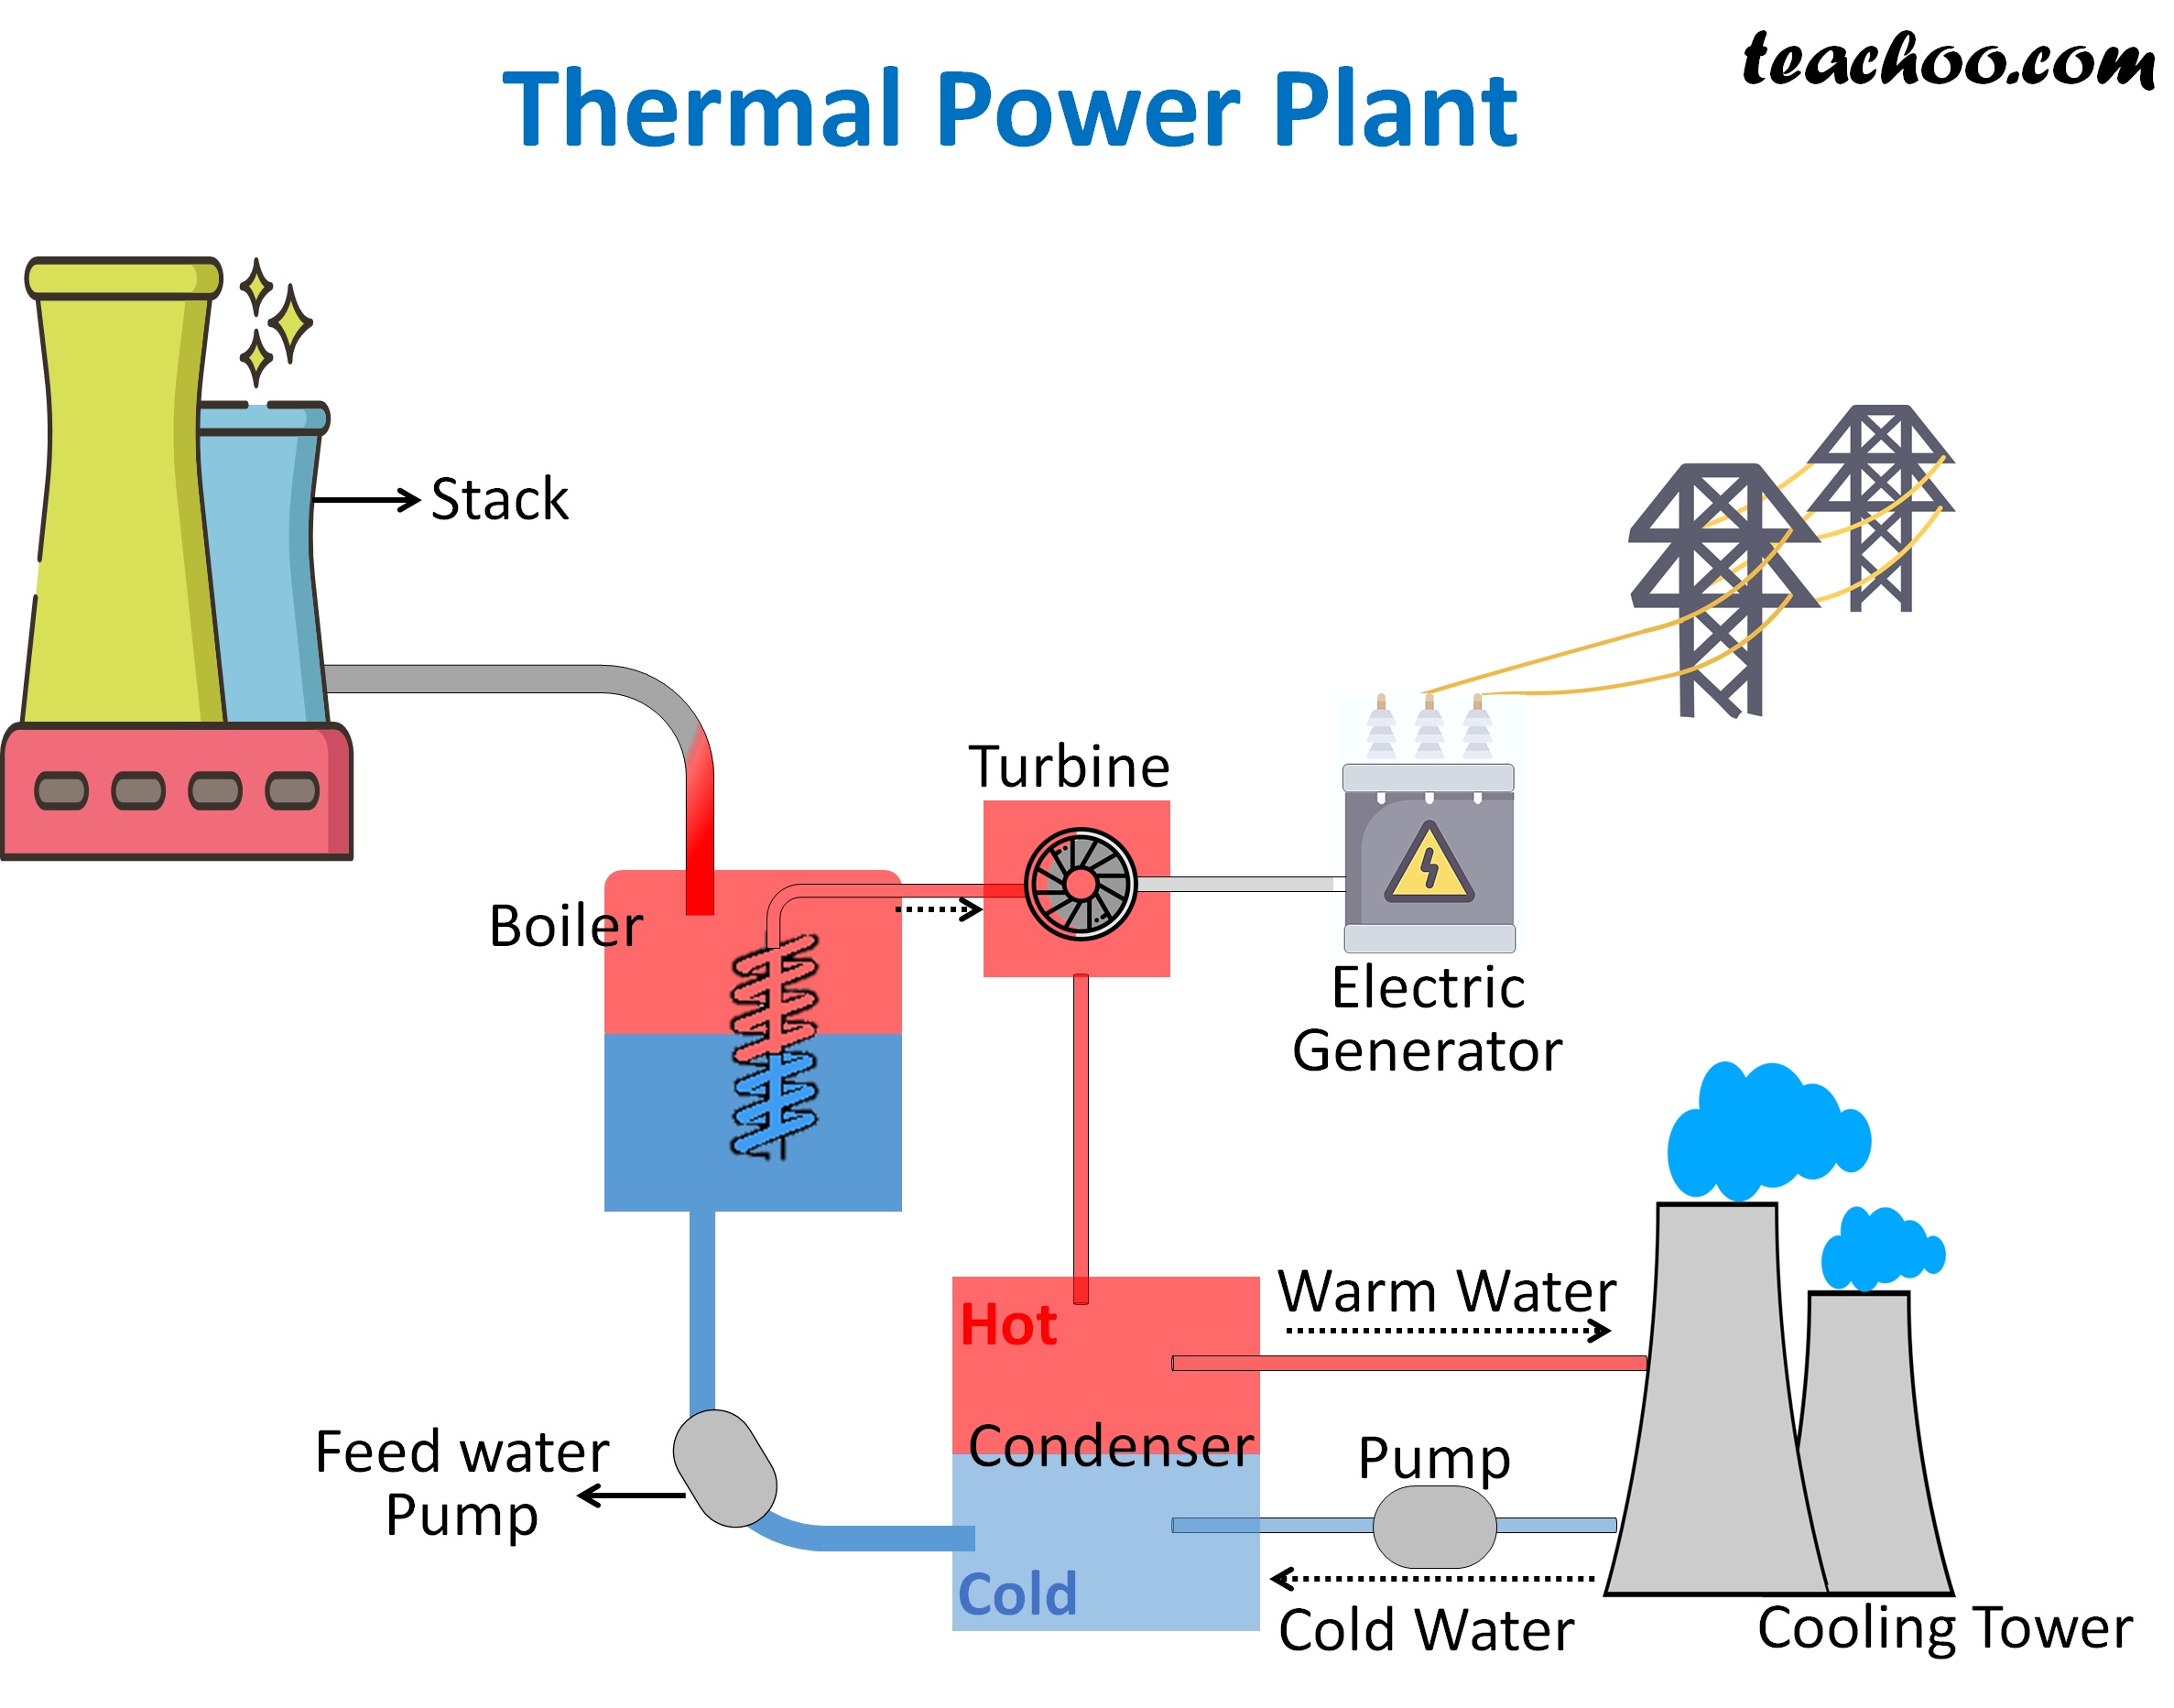 Advantages and Disadvantages of Thermal Power Plant - Teachoo